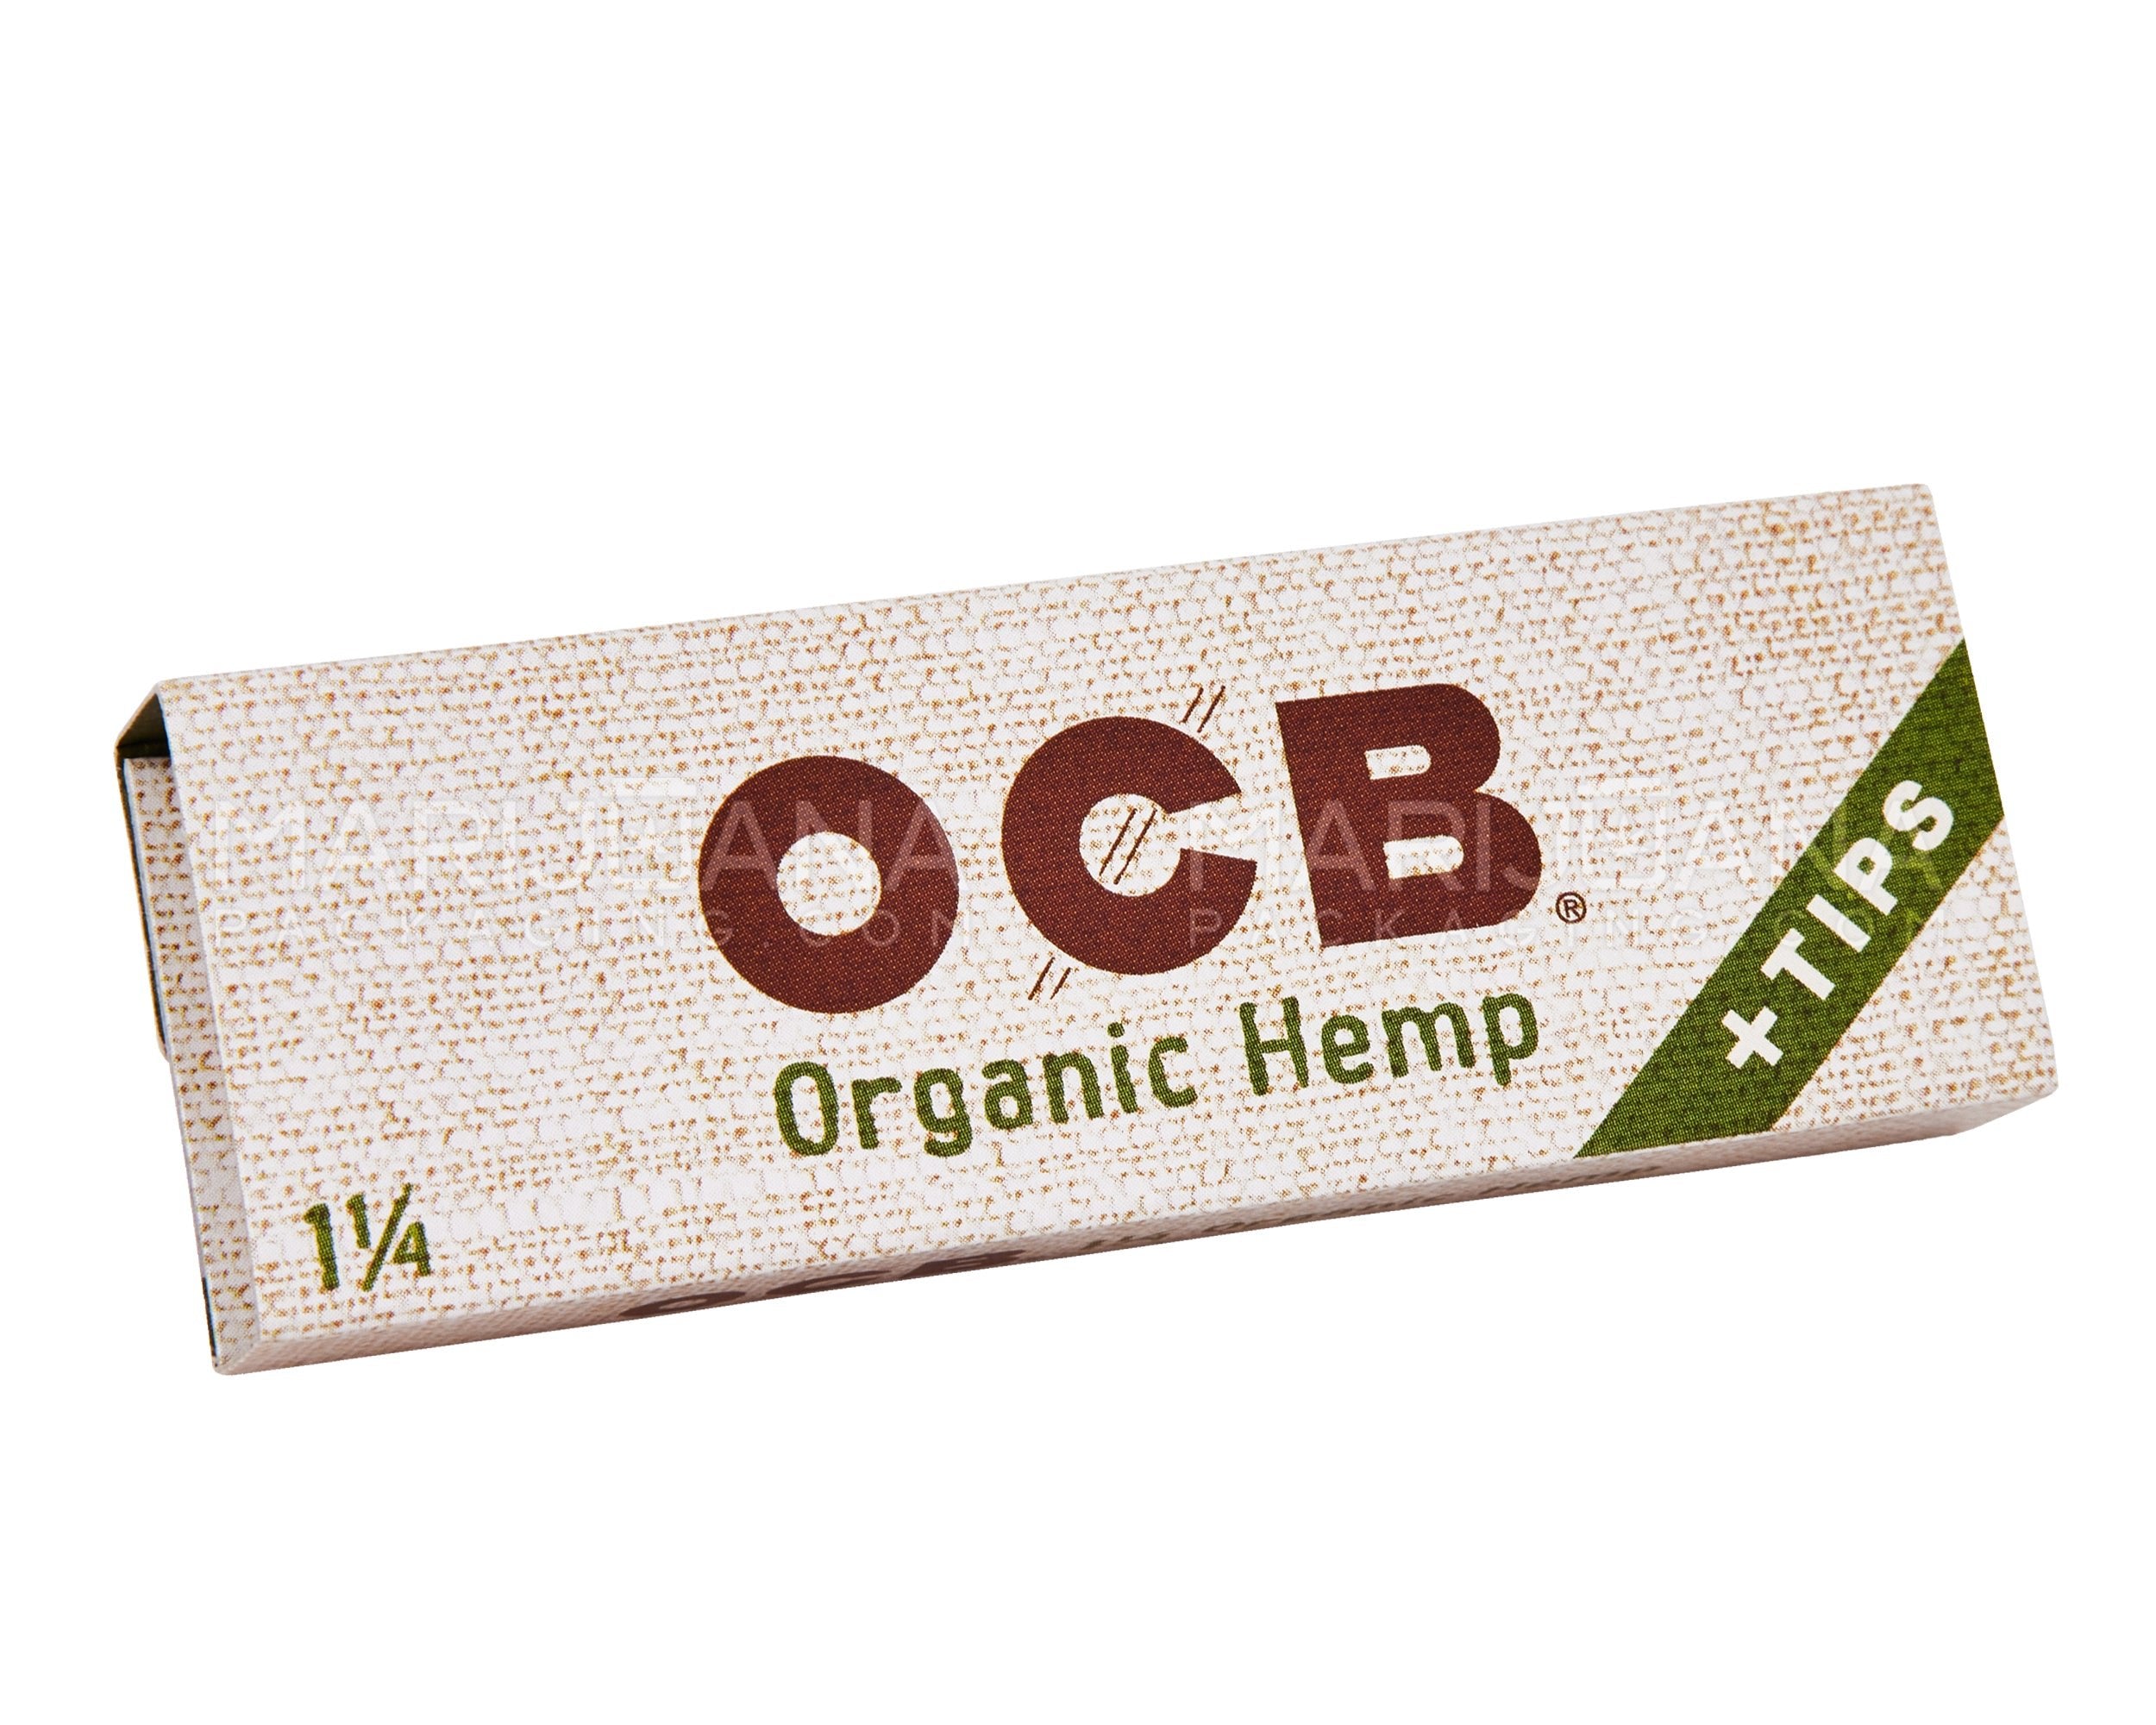 OCB | 'Retail Display' 1 1/4 Size Rolling Papers + Filter Tips | 76mm - Organic Hemp - 24 Count - 3